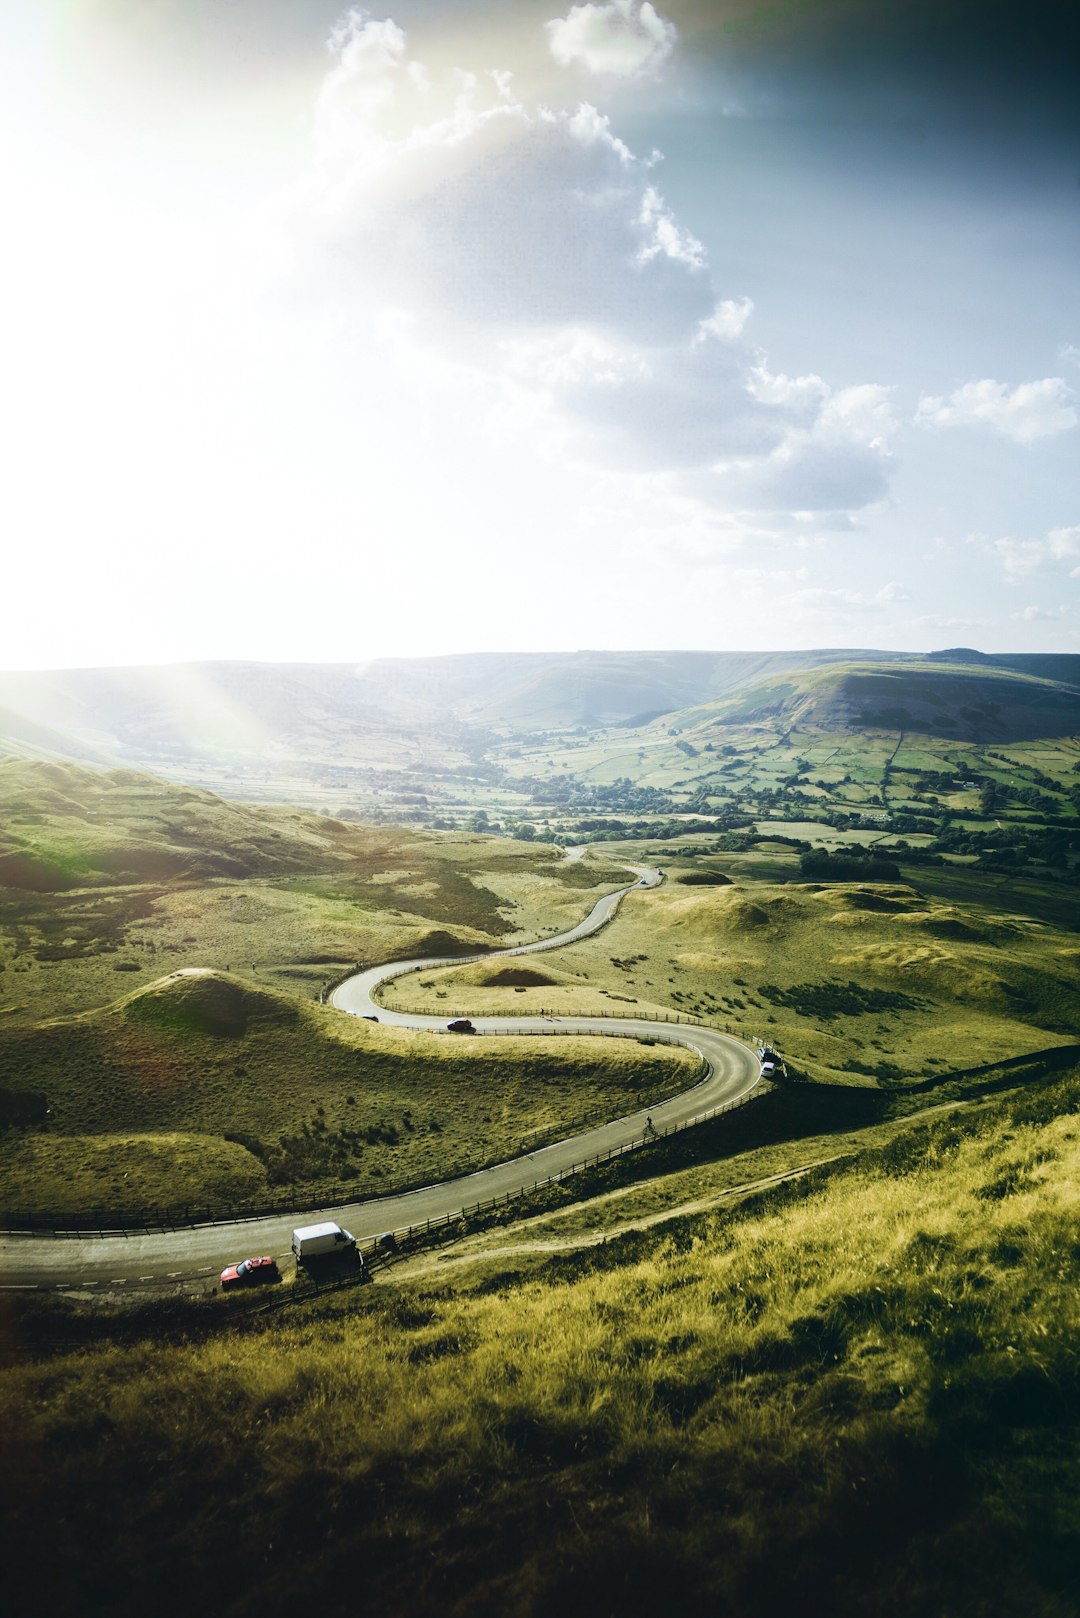 Travel Tips and Stories of Mam Tor in United Kingdom